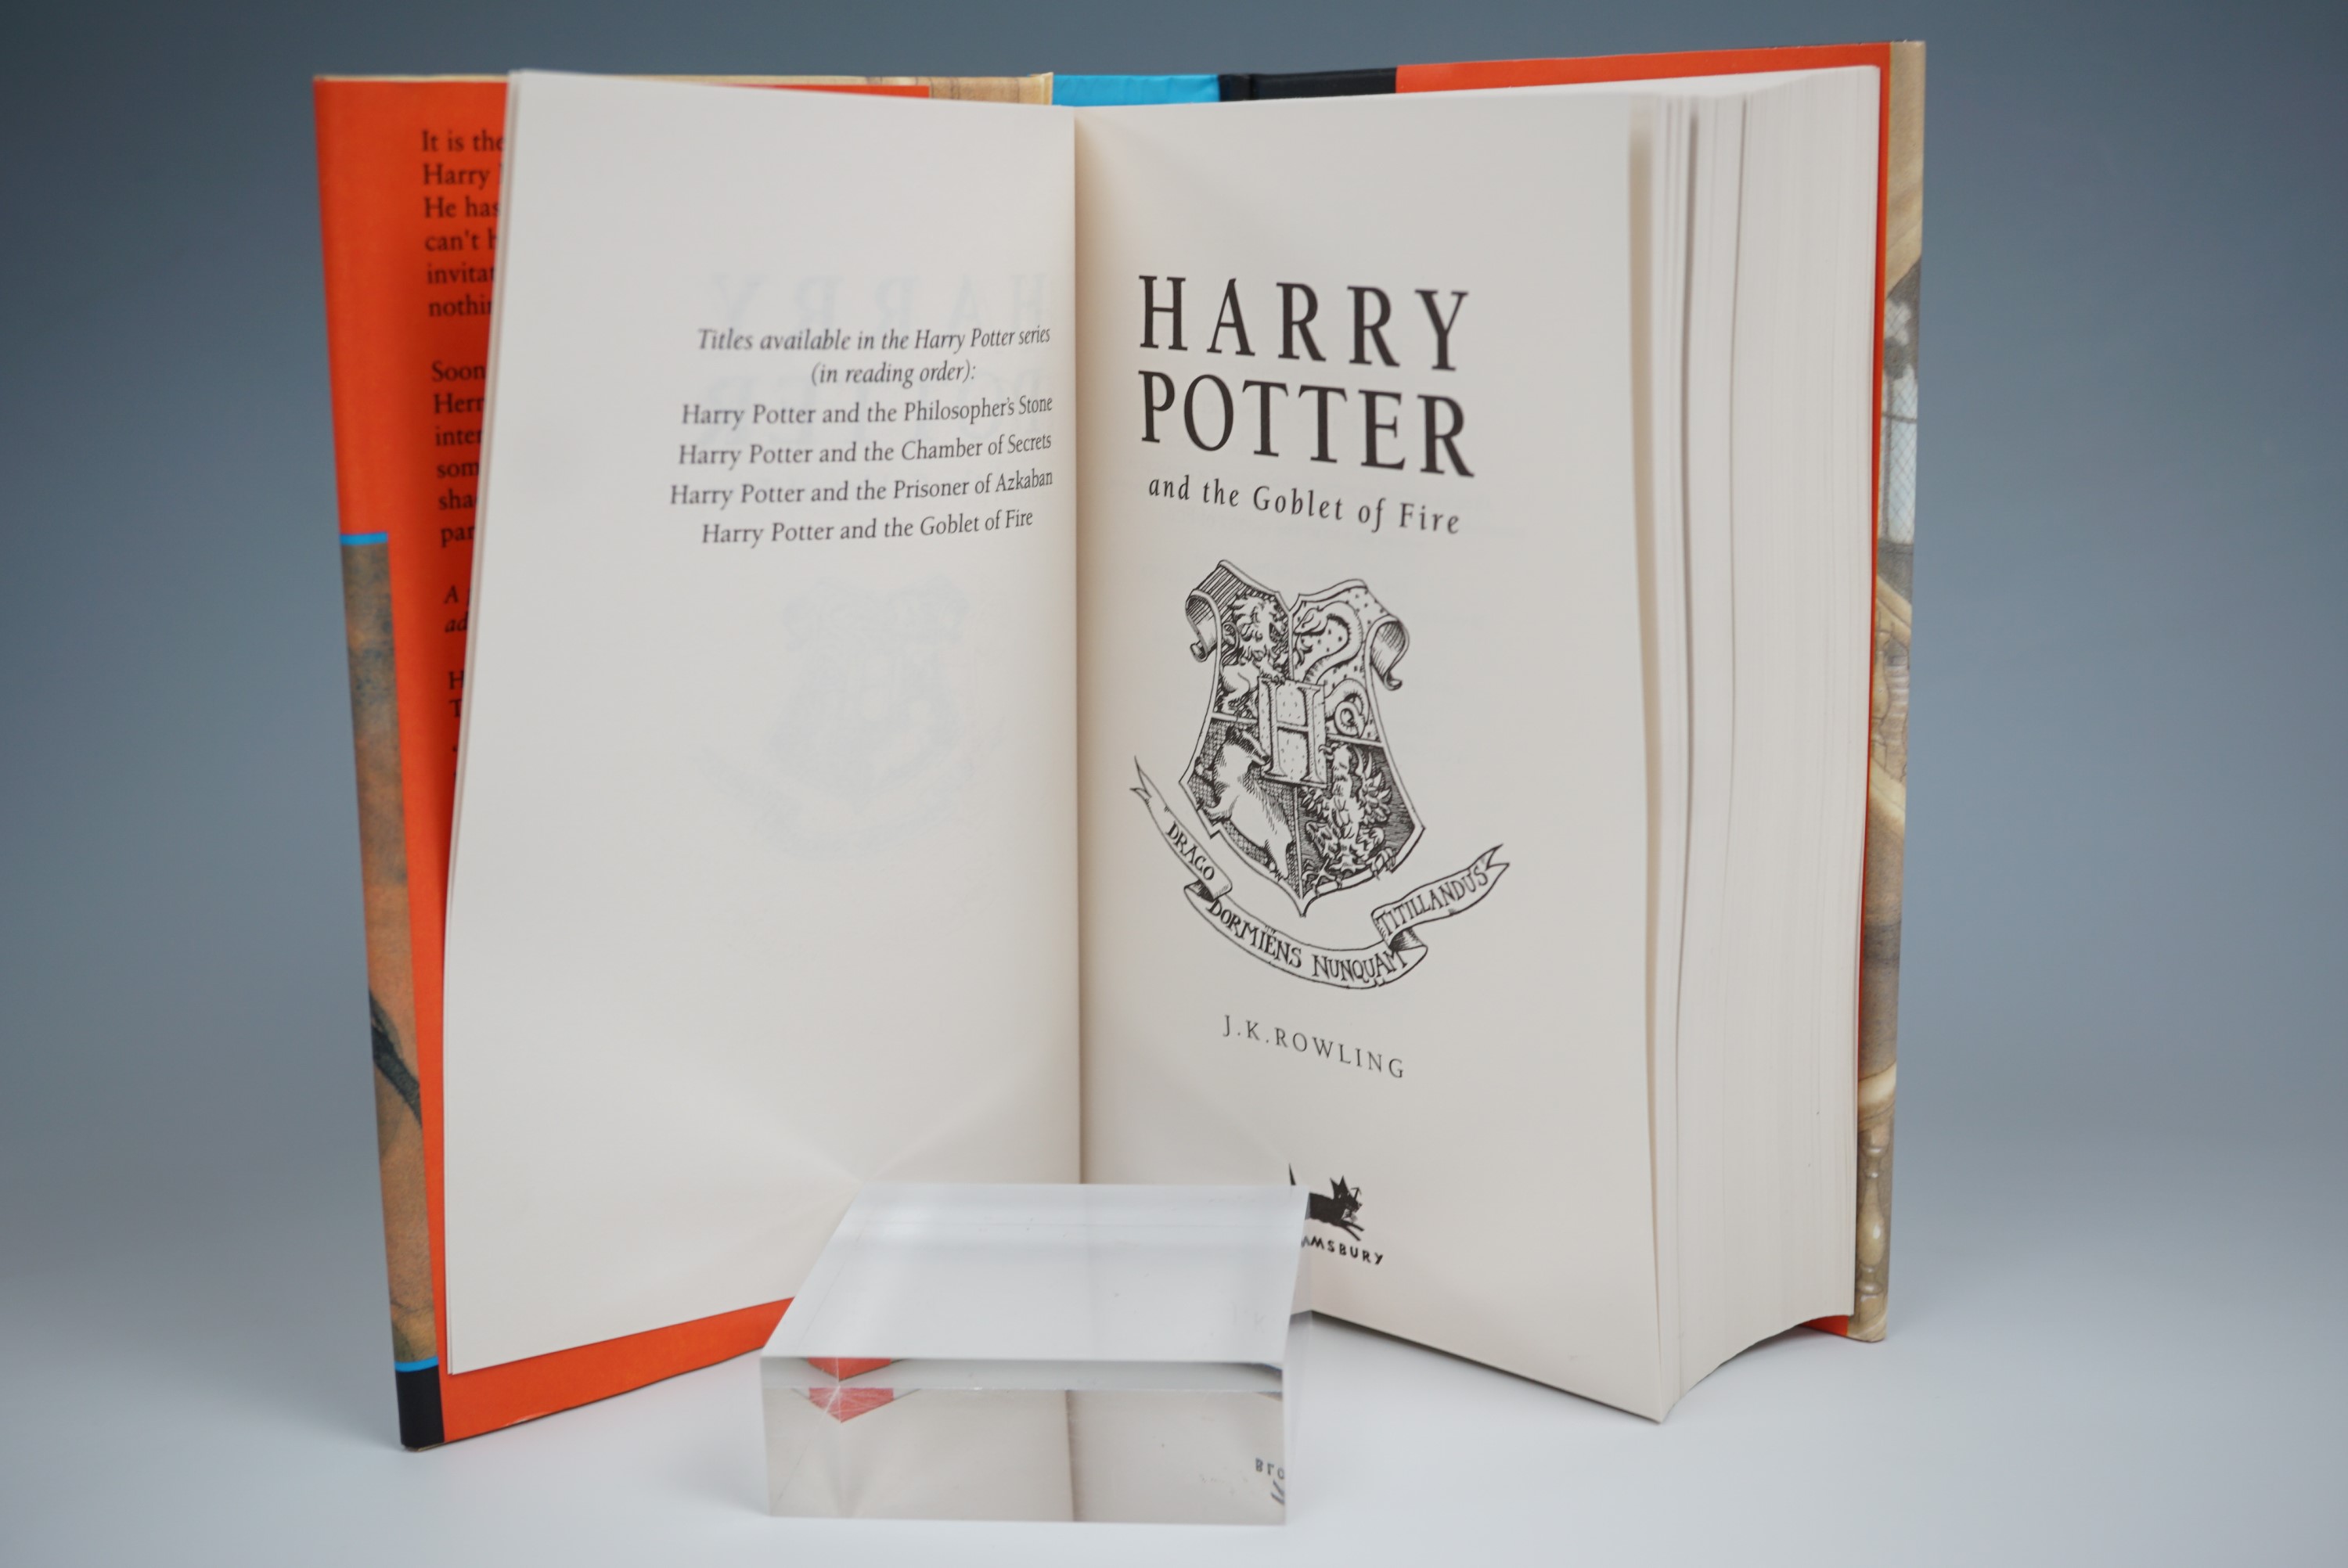 J K Rowling, miss-bound 'Harry Potter and the Goblet of Fire', London, Bloomsbury, 2000, [The text - Image 2 of 2